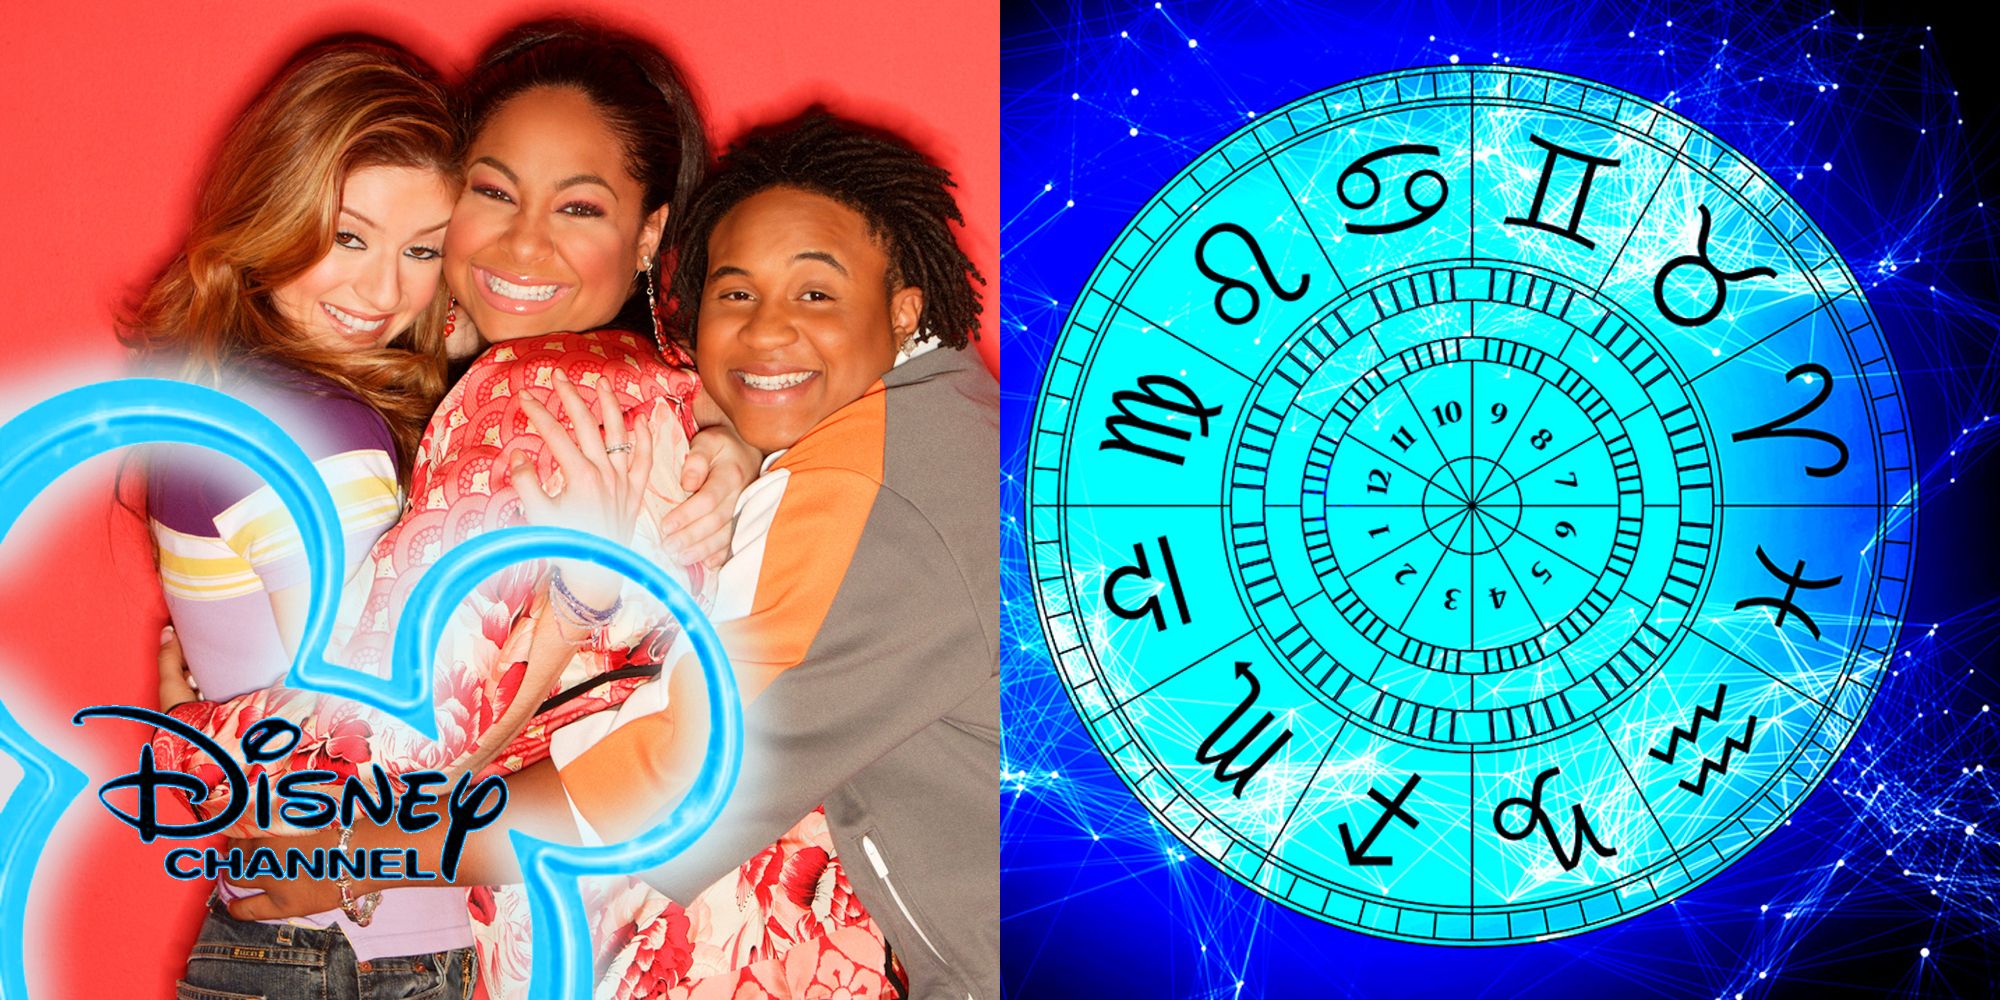 Split image: The cast of That's So Raven pose in a promo photo, the astrological zodiac